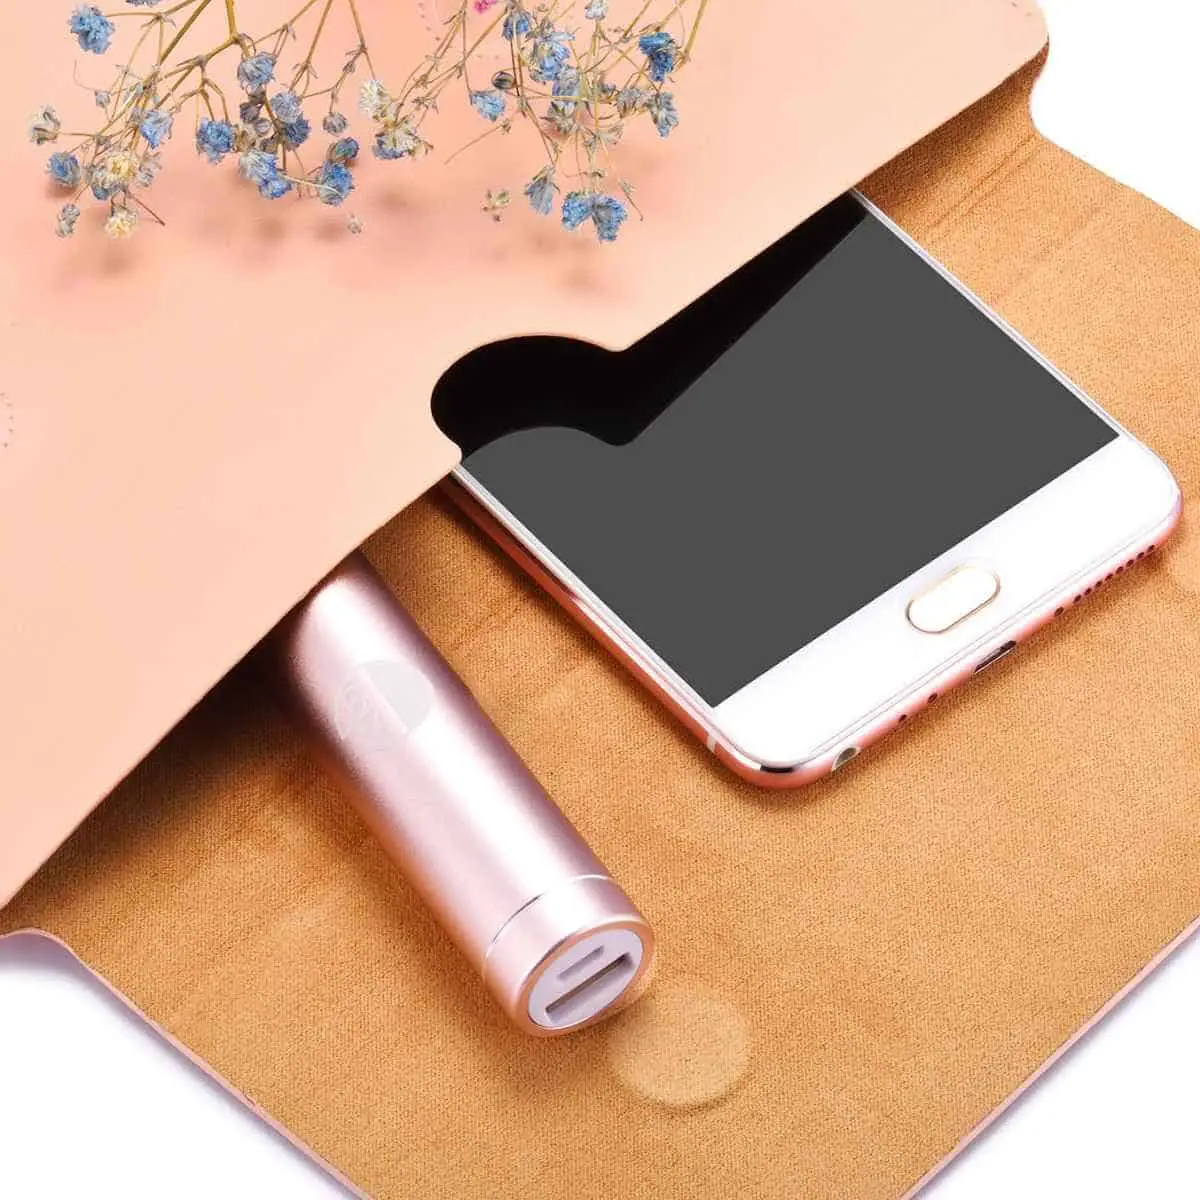  AGS™ Lipstick-Sized Power Bank | Get These Tech Gadgets Via Amazon Prime